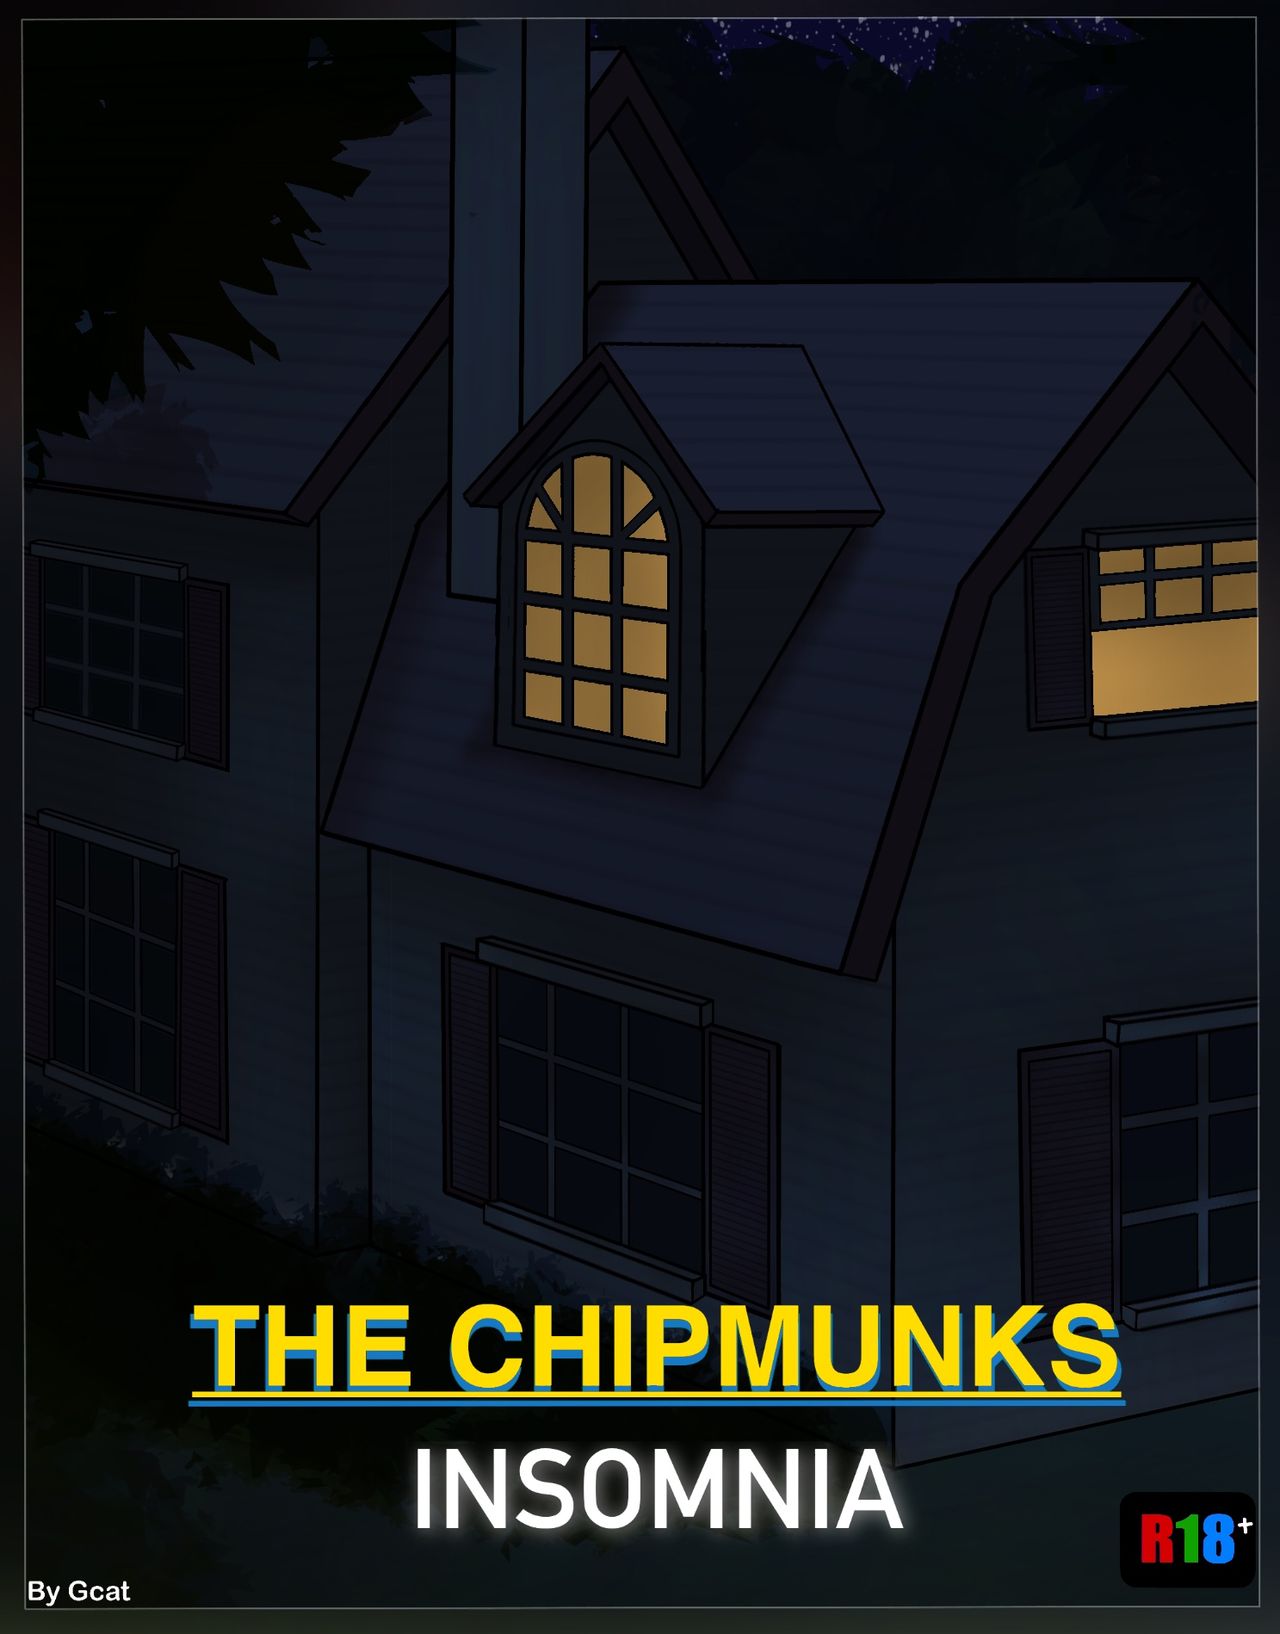 THE CHIPMUNKS Insomnia - Page 1 - HentaiEra